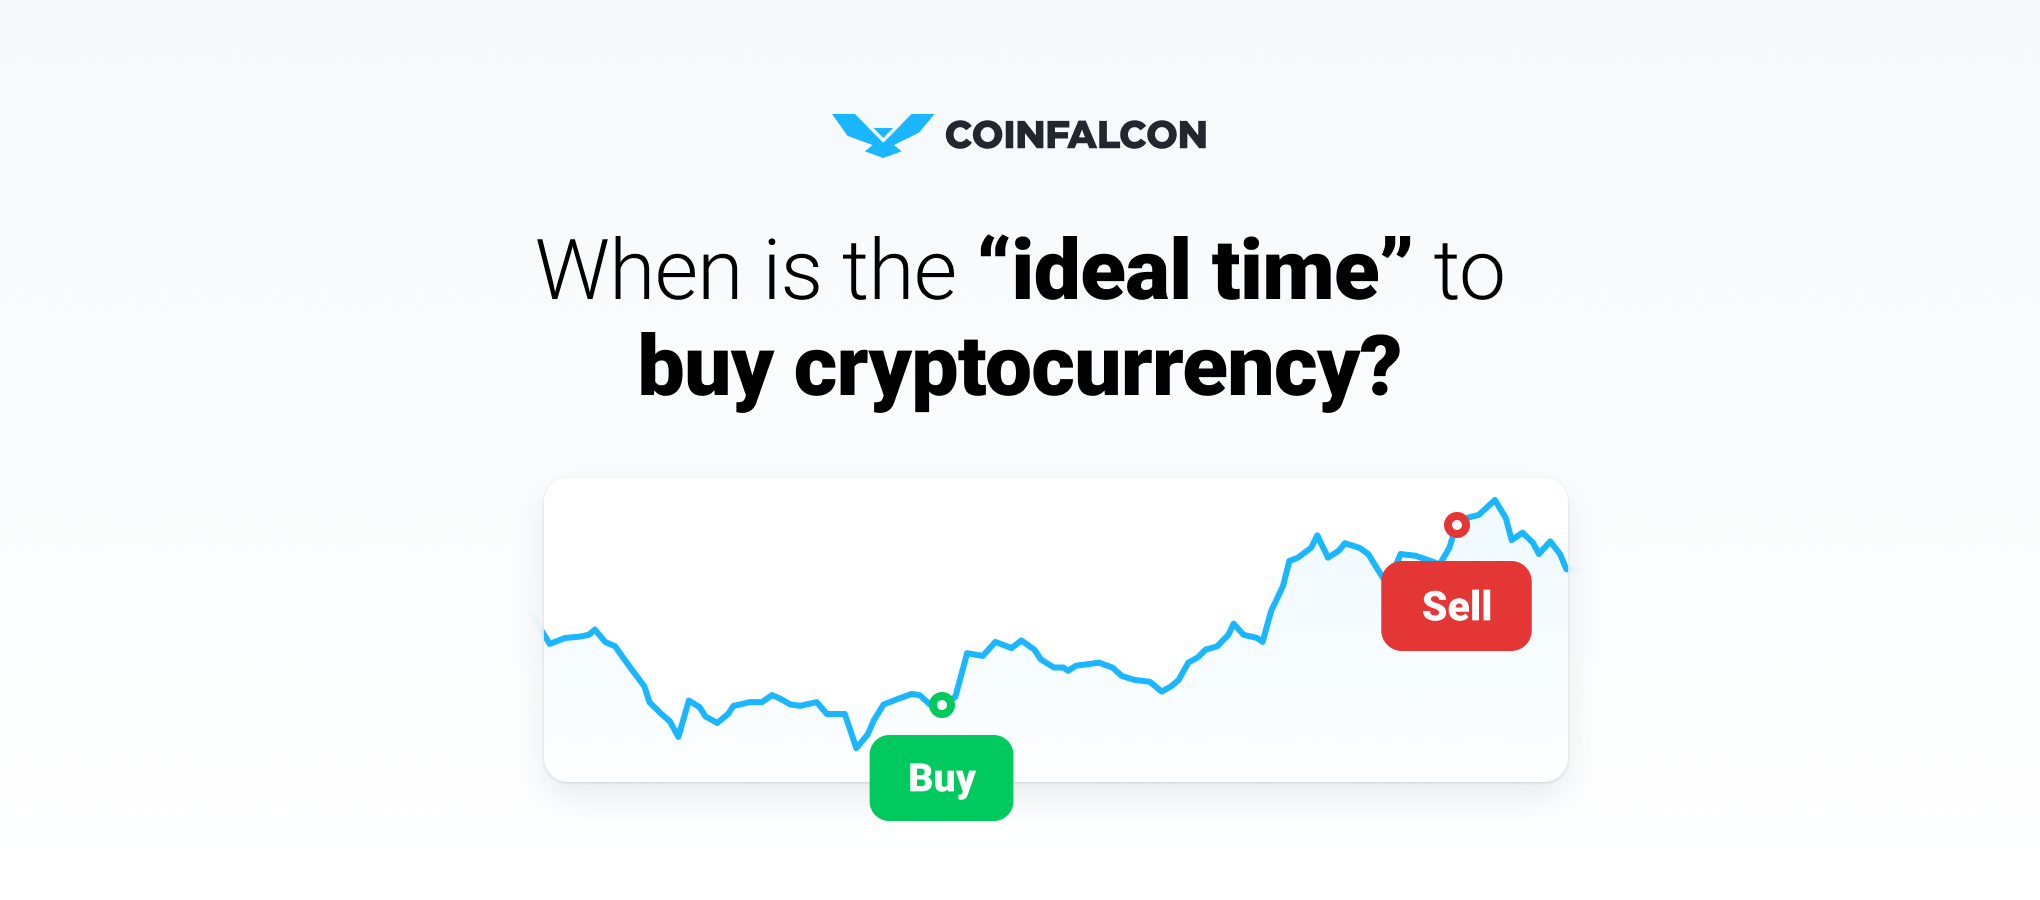 When is the “ideal time” to buy cryptocurrency?